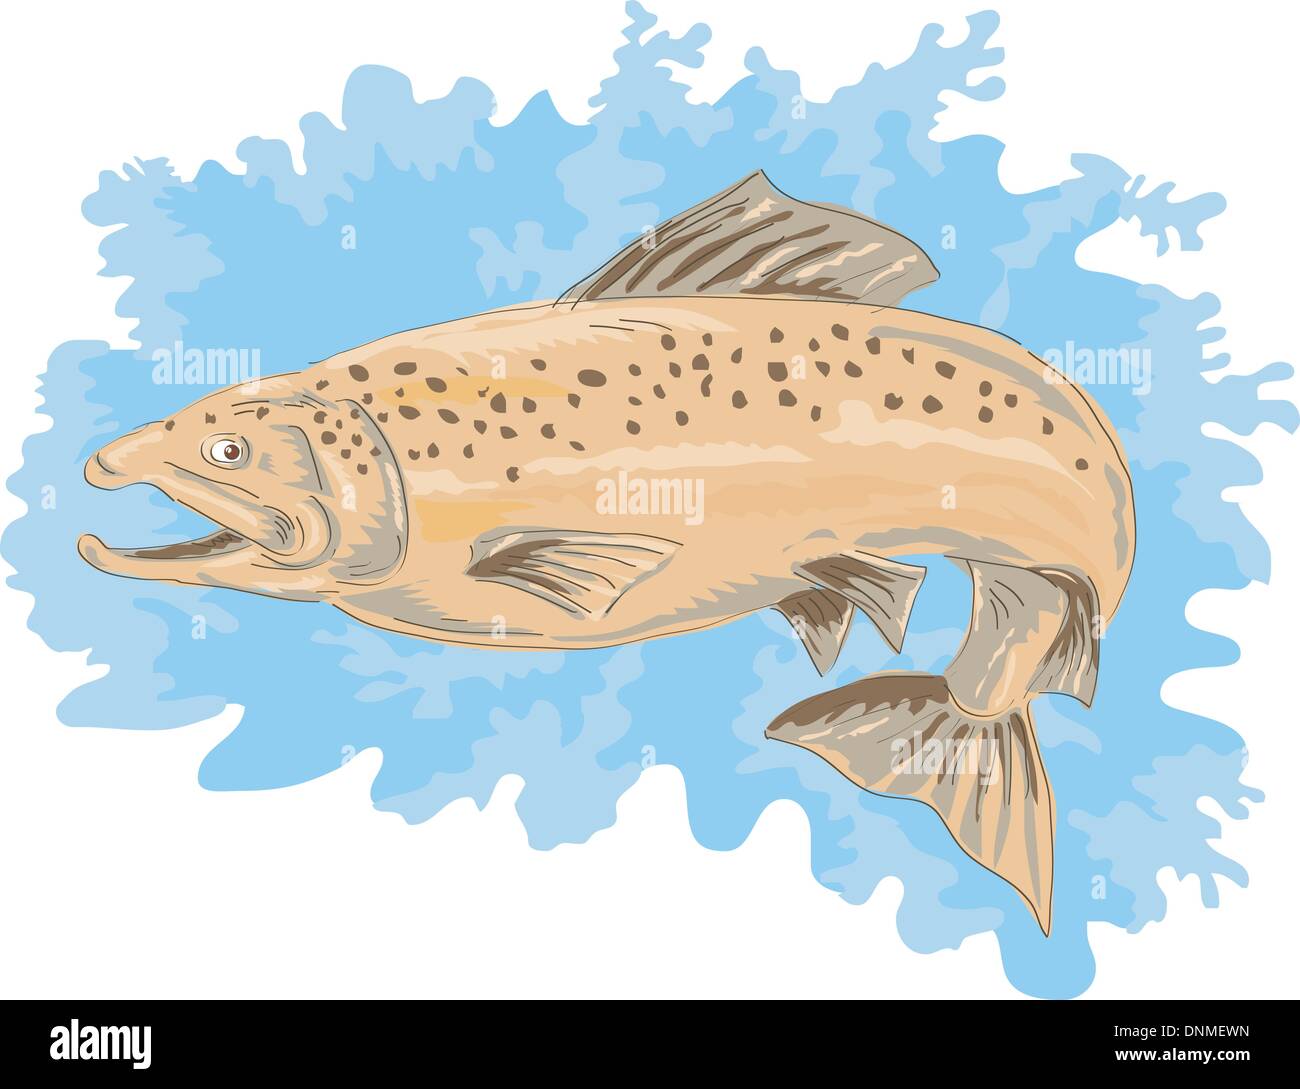 Jumping Trout Fish Vintage Template Stock Illustration - Download